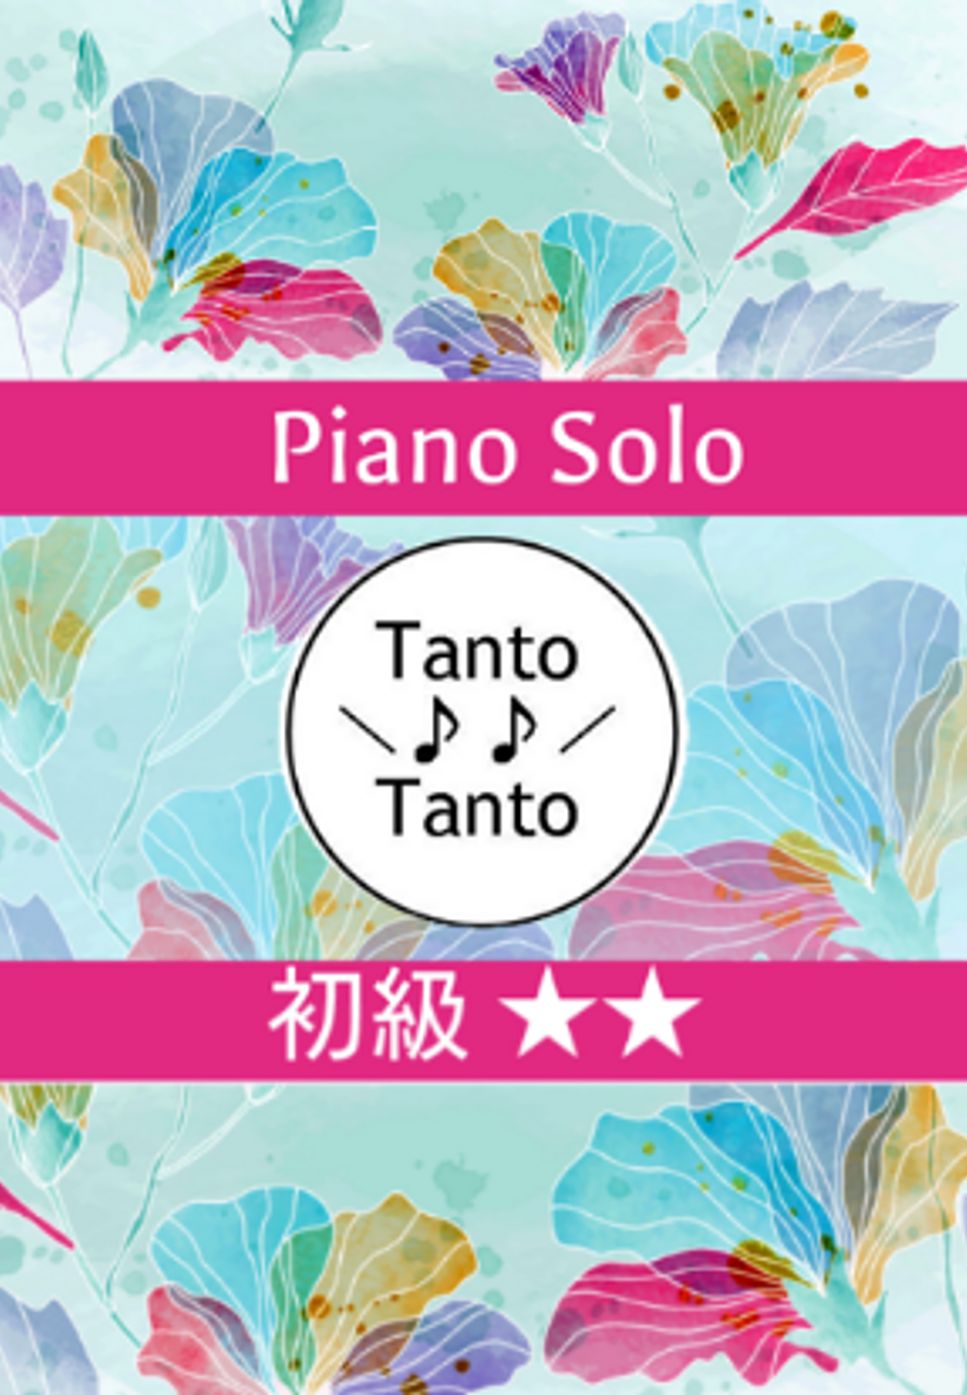 Harold Arlen - Over The Rainbow『虹の彼方に』 (Piano Solo in G) by Tanto Tanto